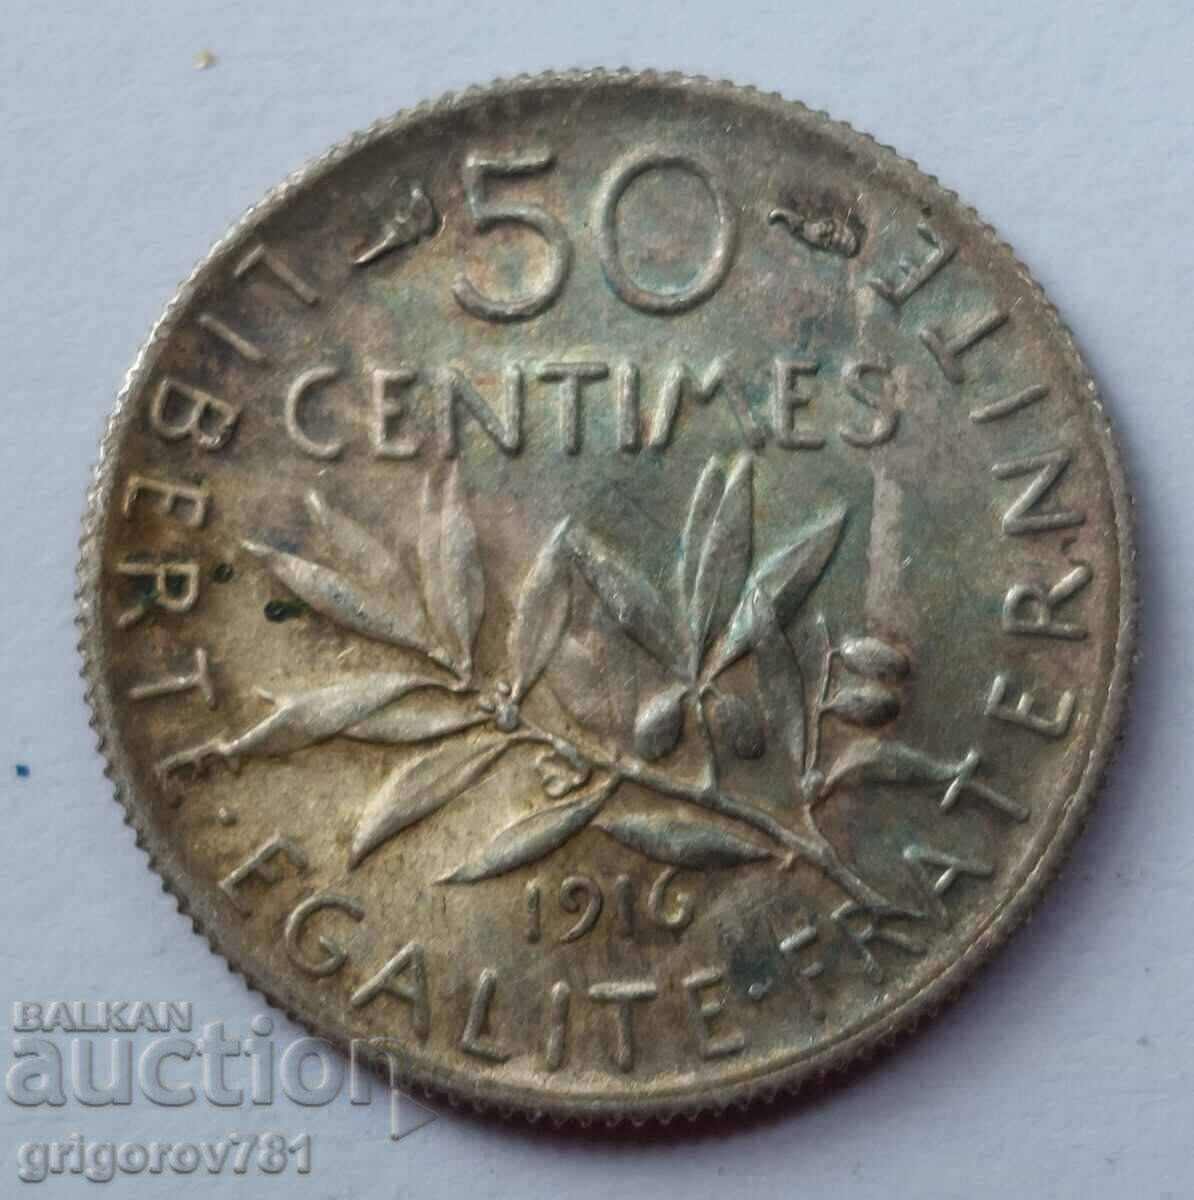 50 centimes silver France 1916 - silver coin №56